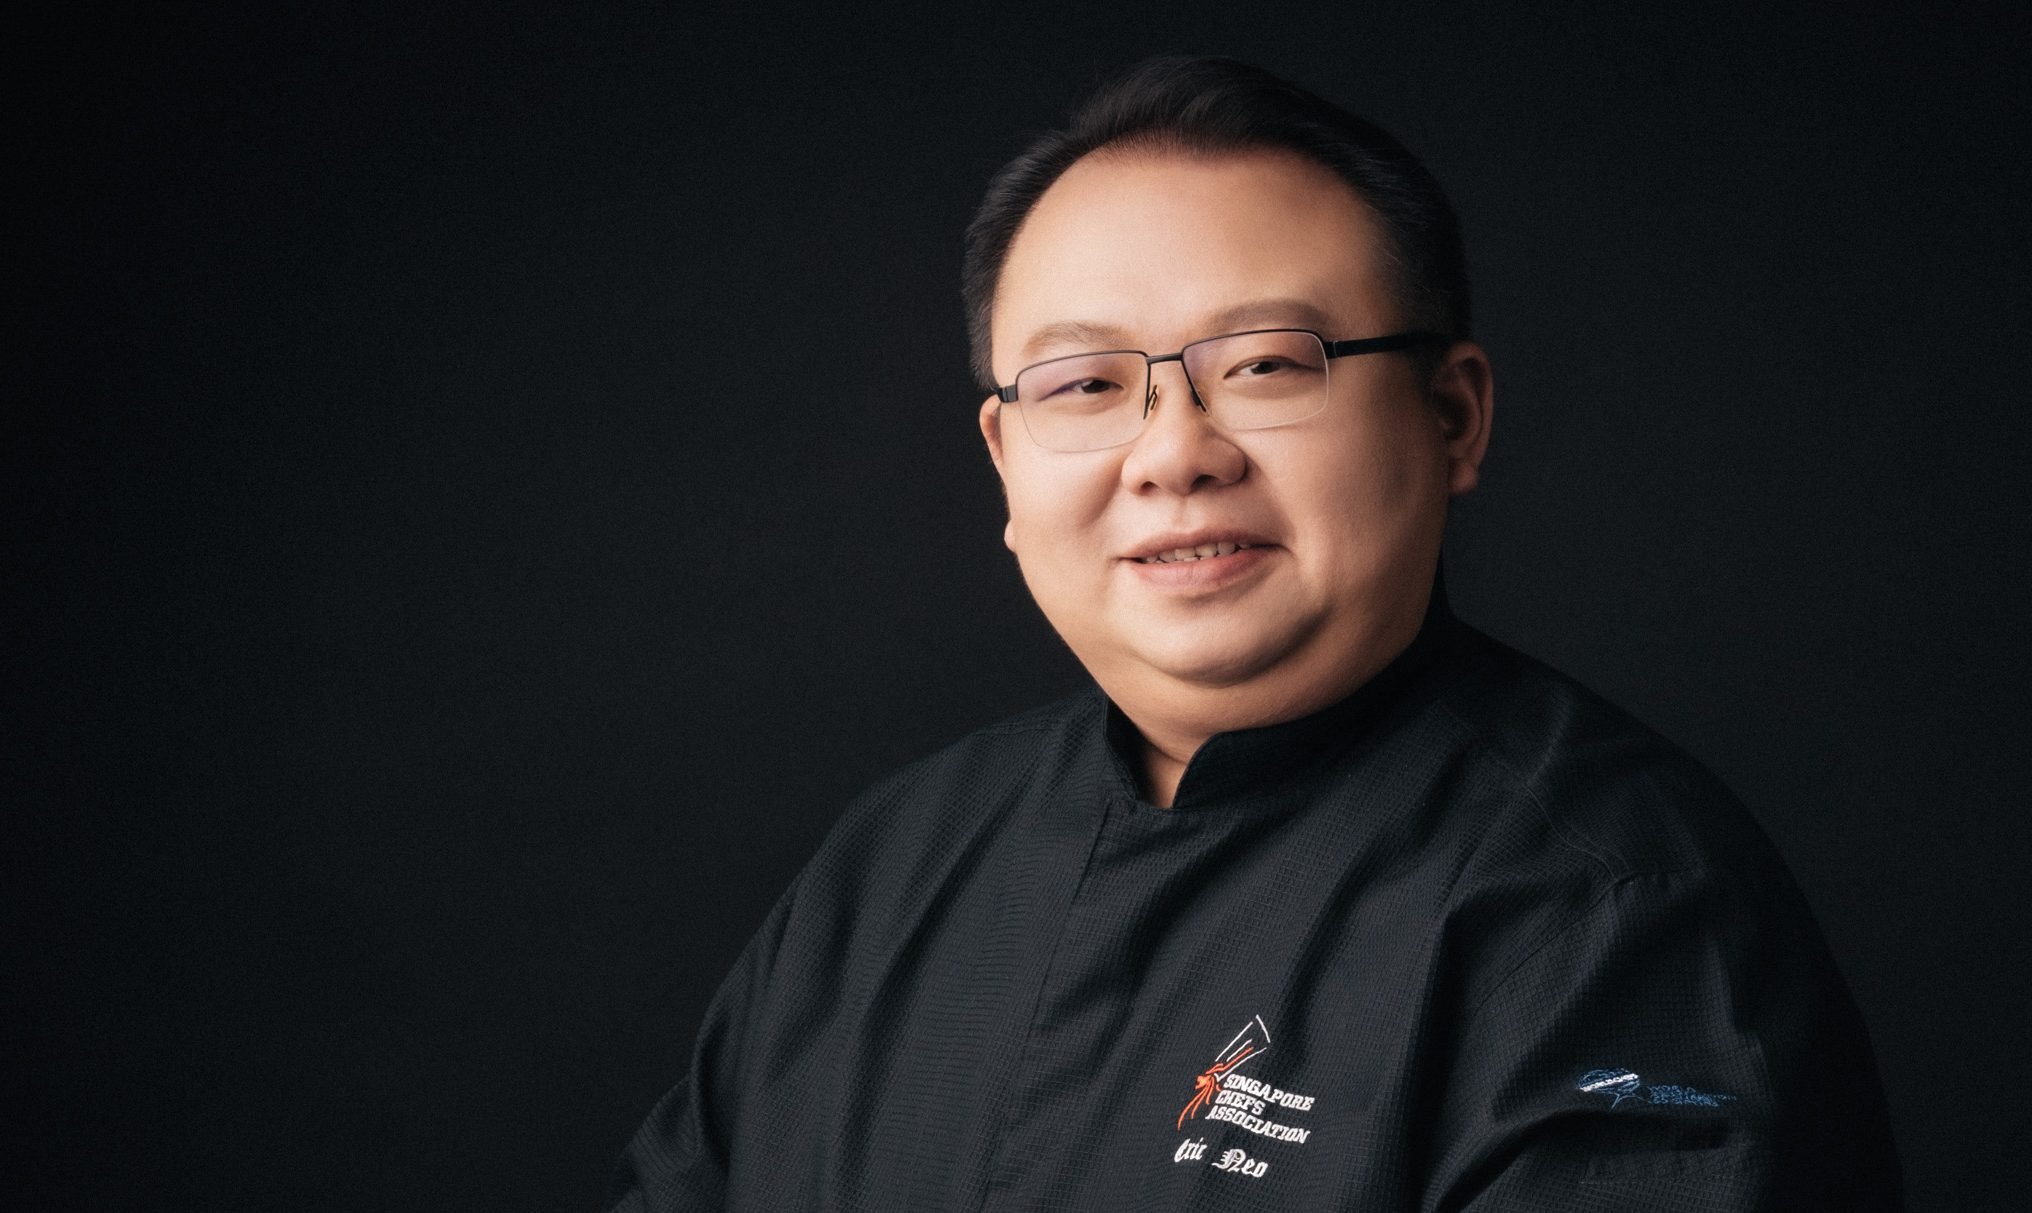 Singapore Cuisine as Expressed by Chef Eric Neo